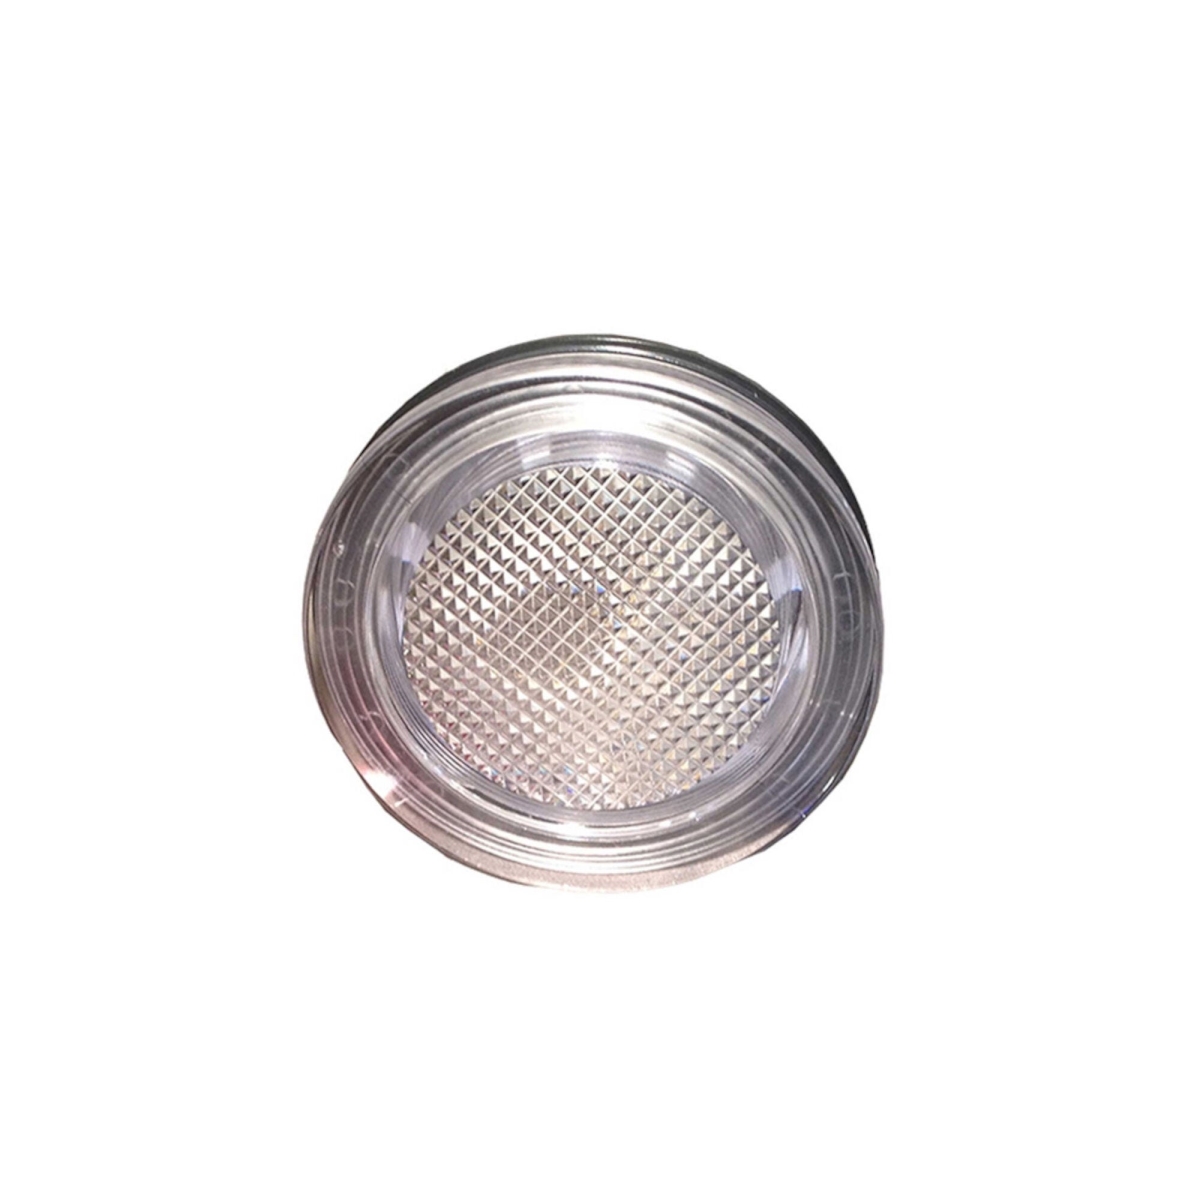 Picture of Allied Innovations P0021 Front Access Lighting Lens - Clear